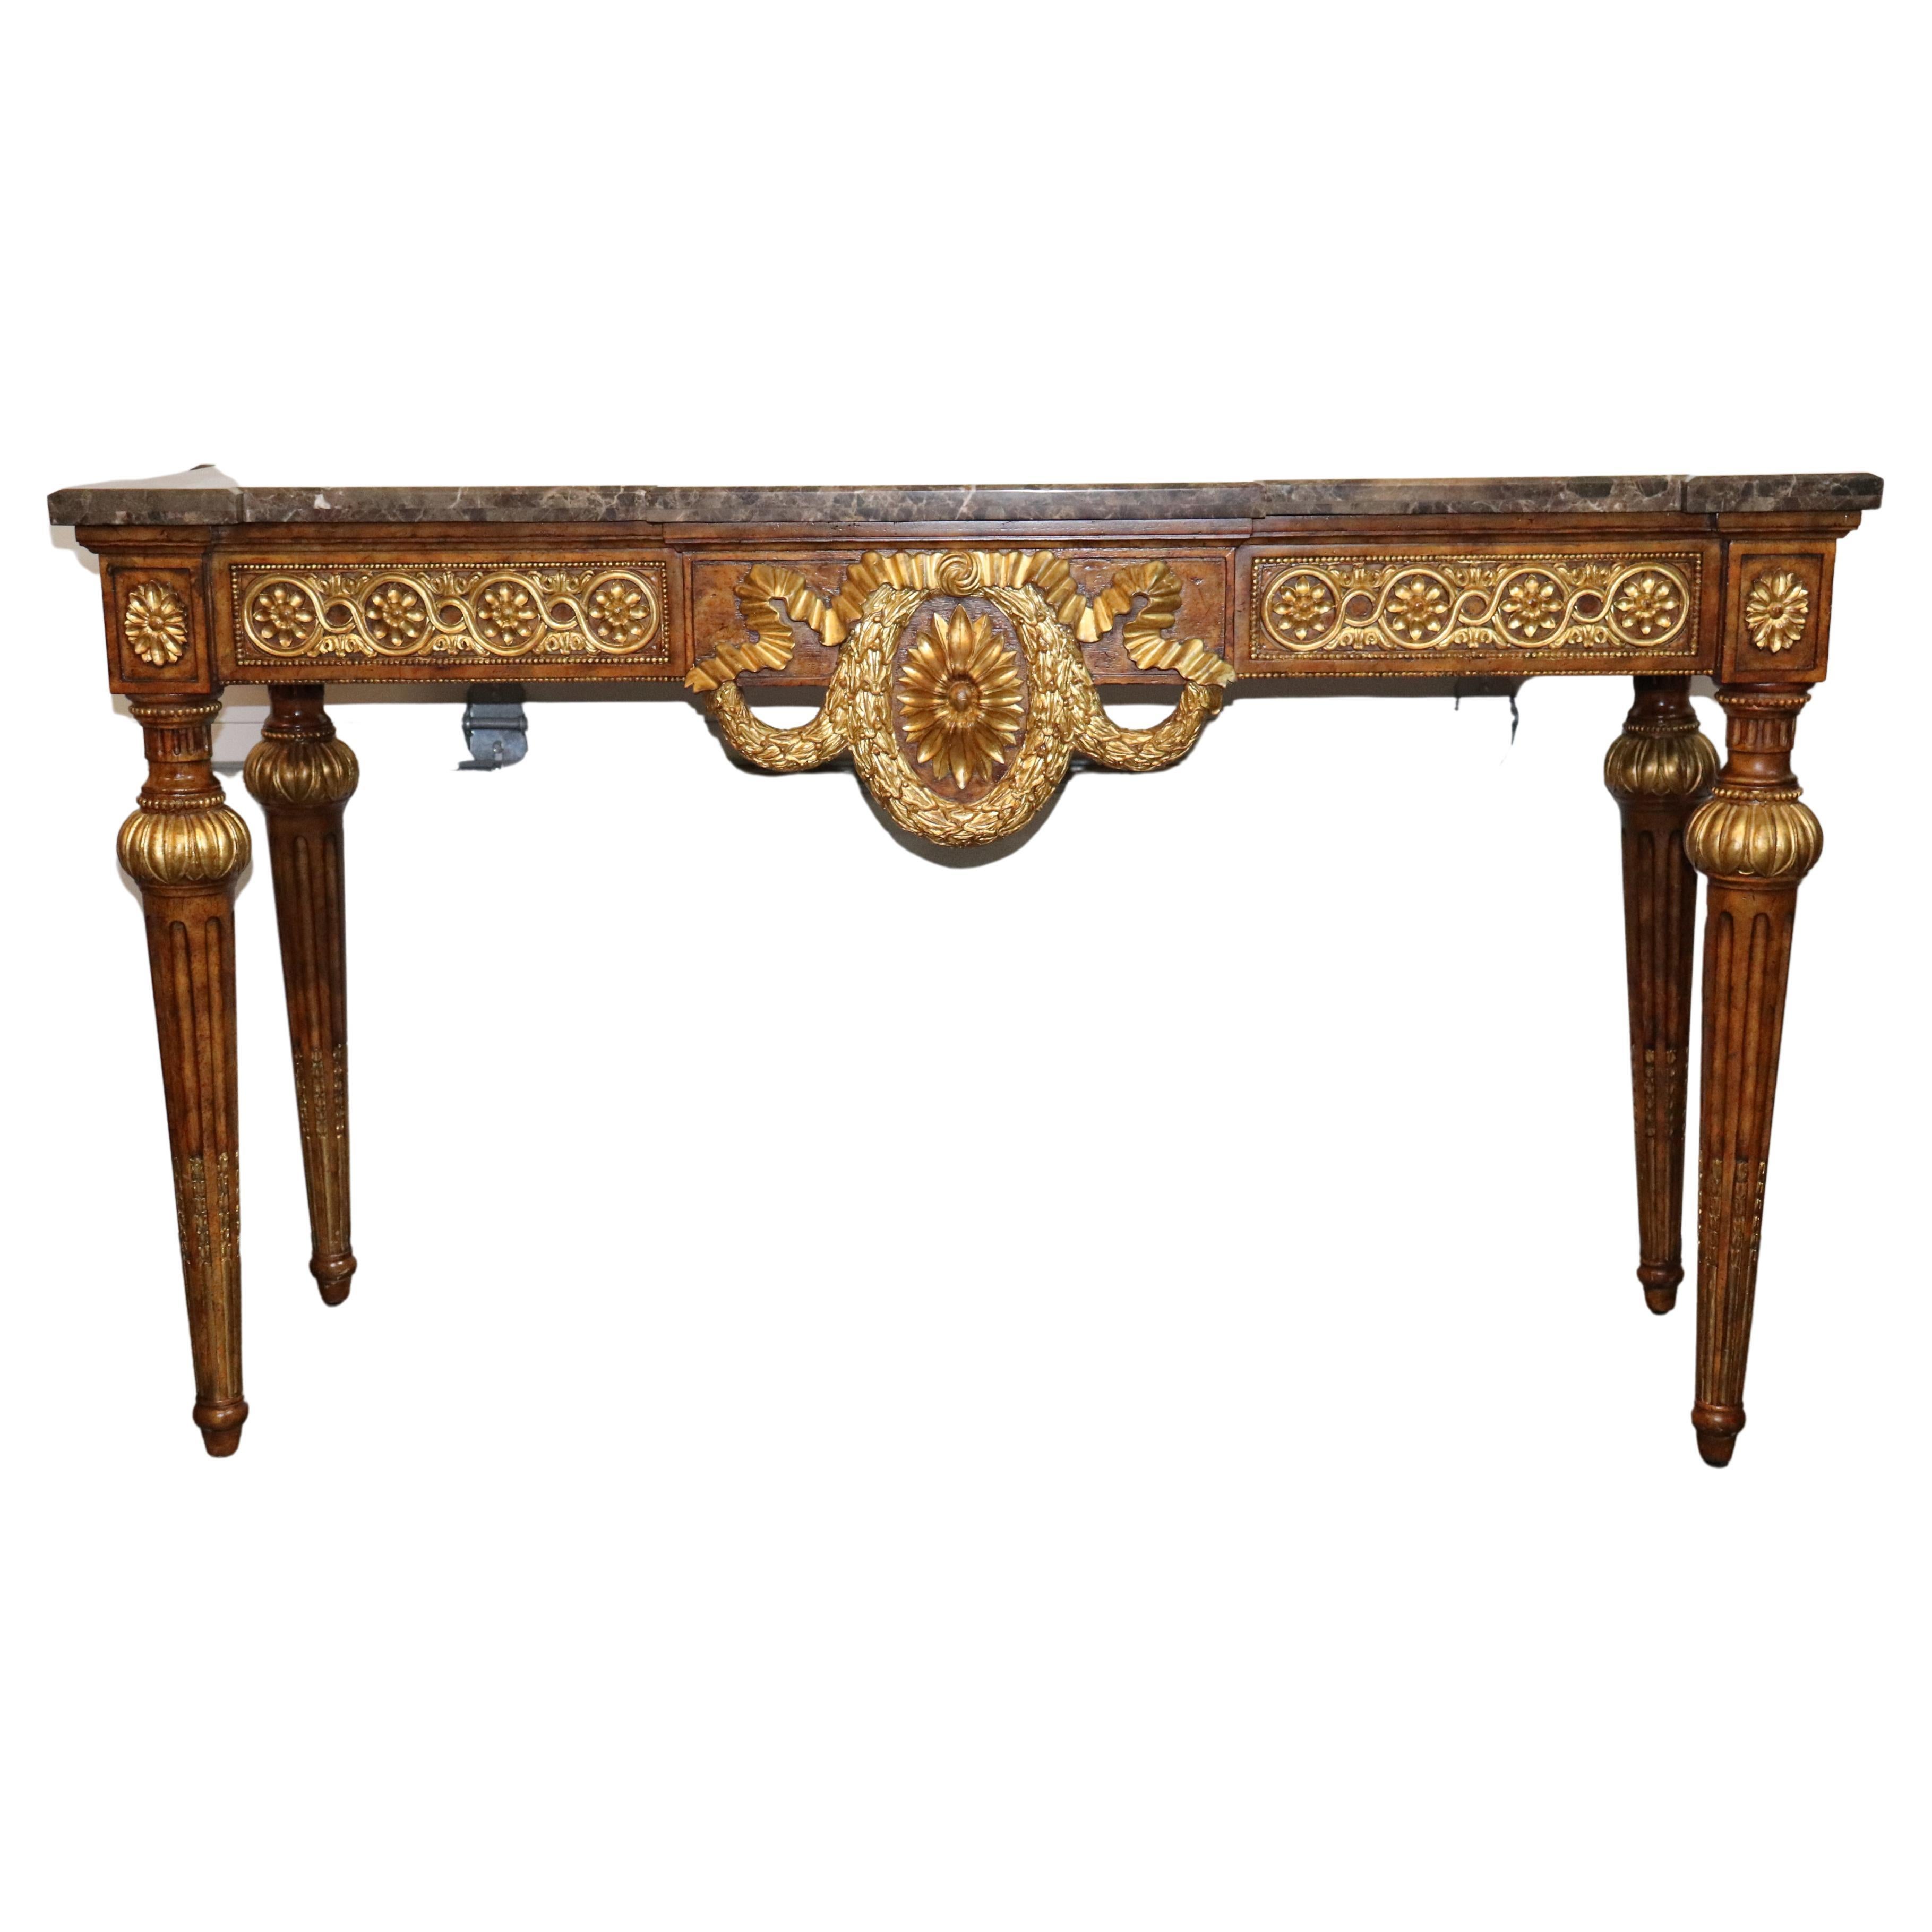 This is a gorgeous console table with a fantastic gilded and carved frame and even better marble top. The table is in excellent condition and so is the top. The table is 62 wide x 36.5 tall x 23 deep.